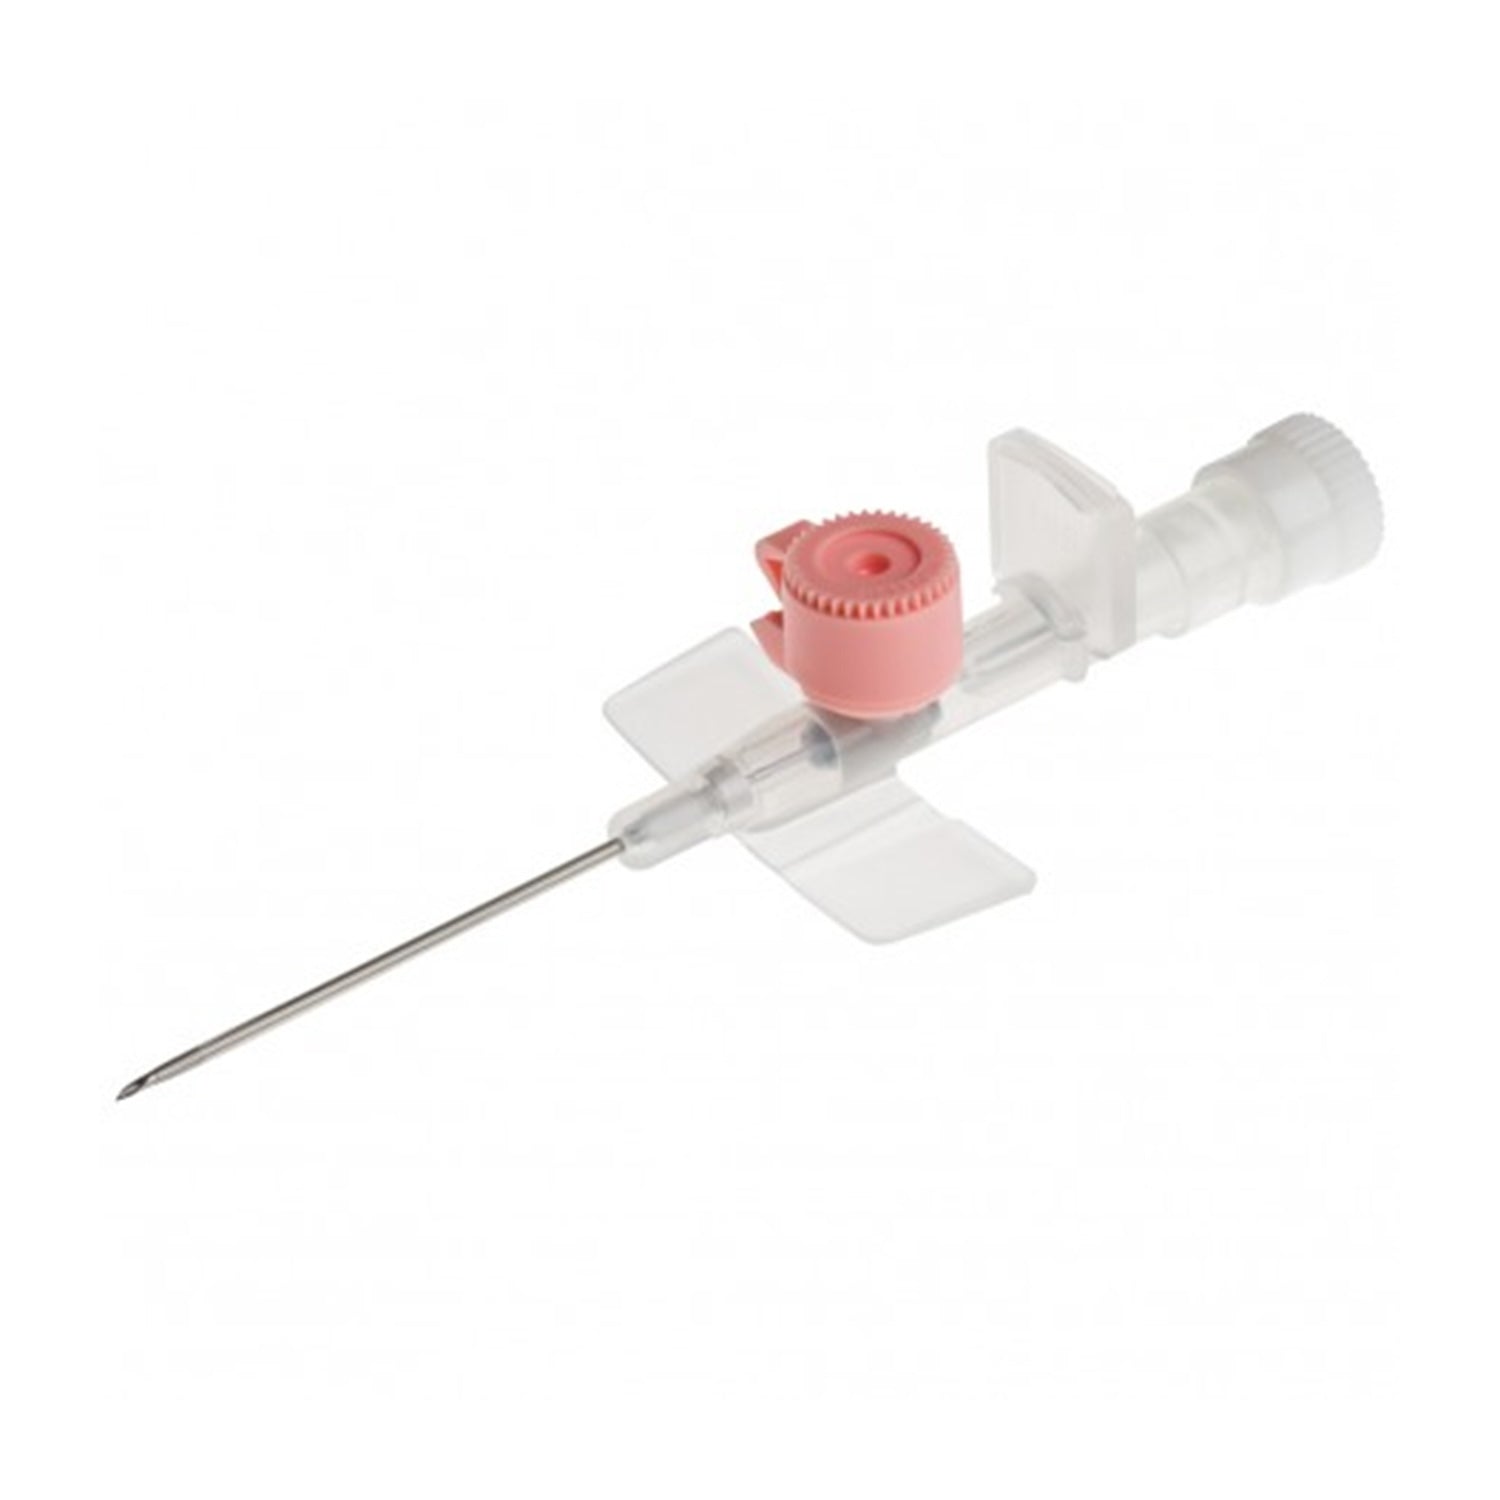 BD Venflon Pro Peripheral IV Cannula with Injection Port | Pink x 20G x 32 x 1mm | Single